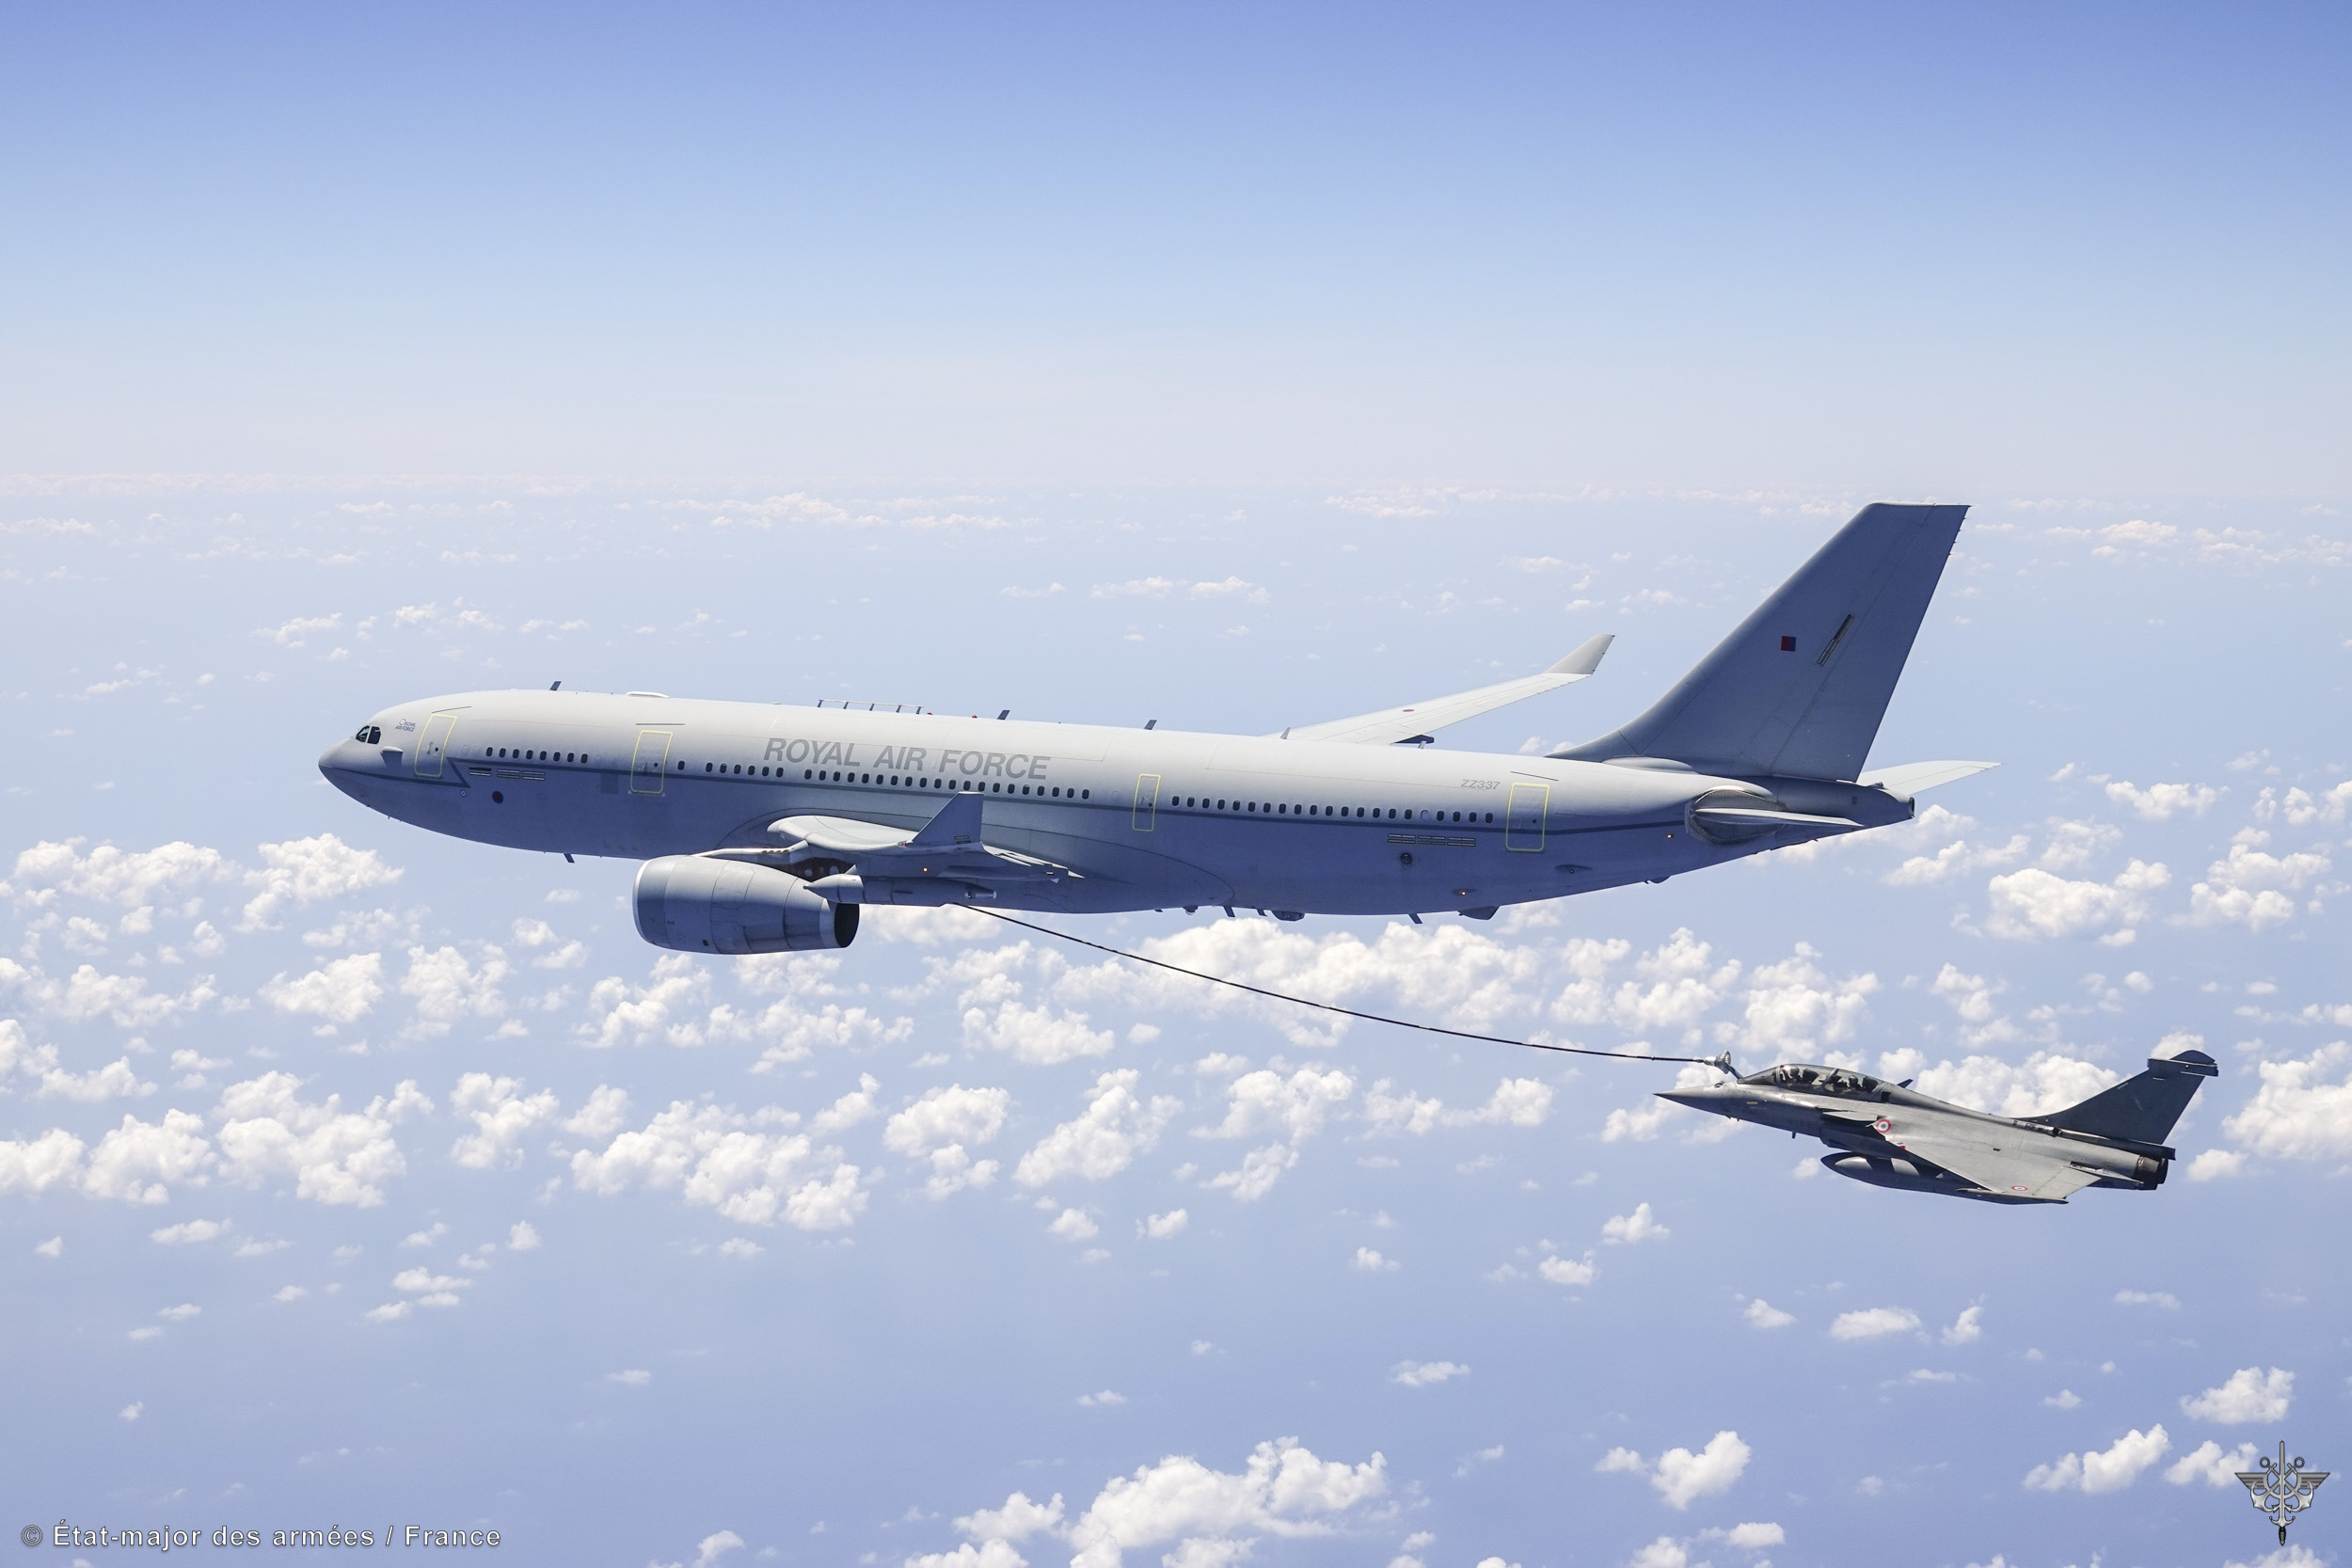 Image shows RAF Typhoon refuelling RAF Voyager in the air.